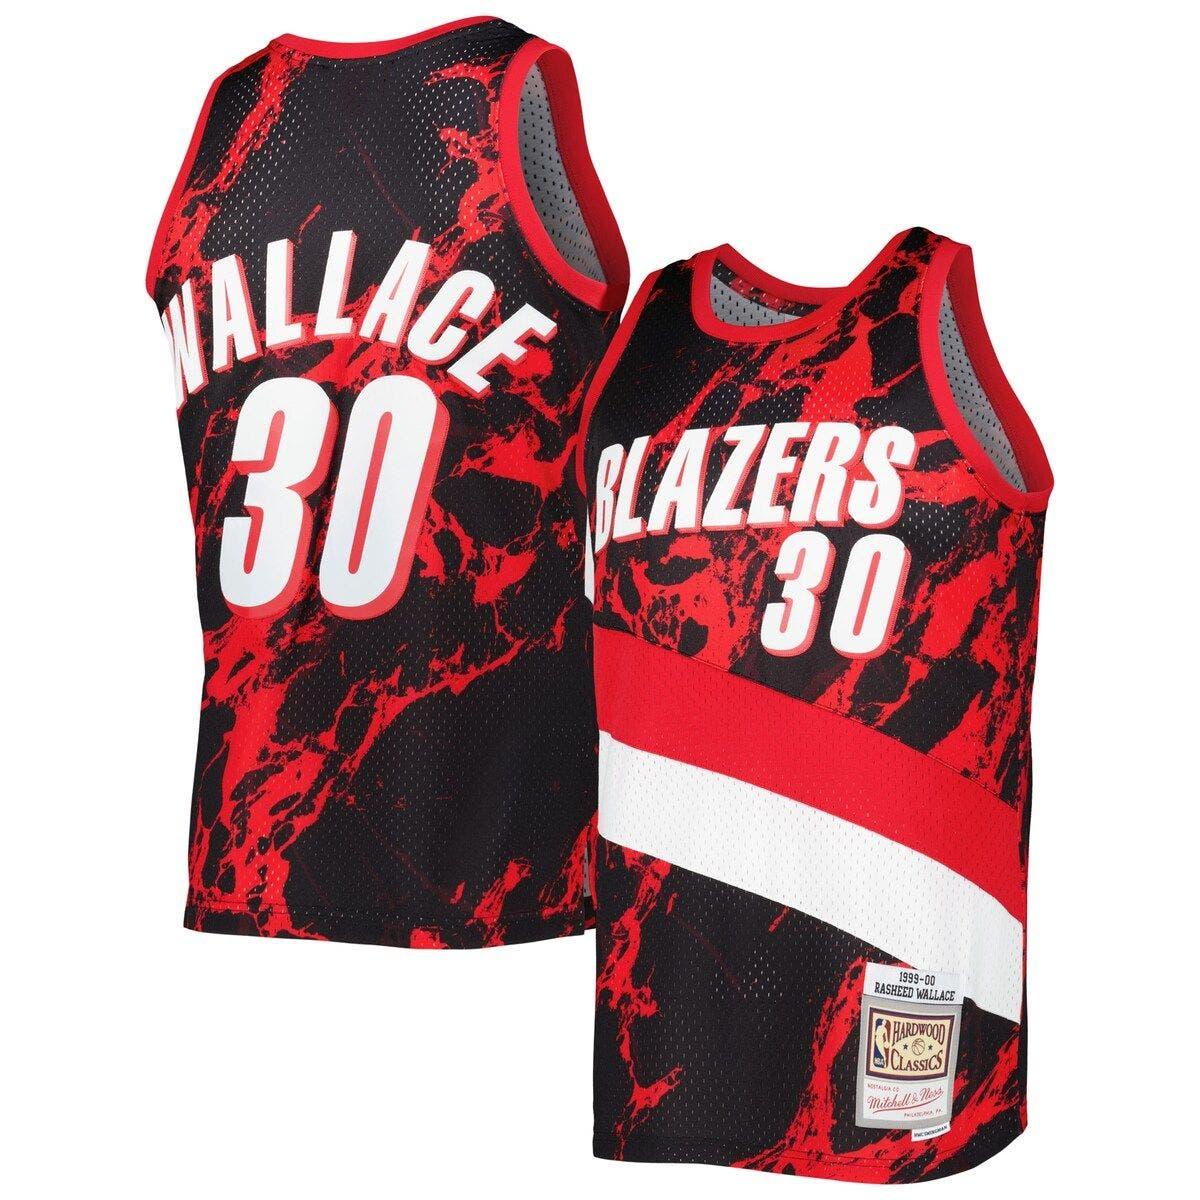 Men's Mitchell & Ness Rasheed Wallace Red Portland Trail Blazers Hardwood  Classics Player Name & Number T-Shirt 